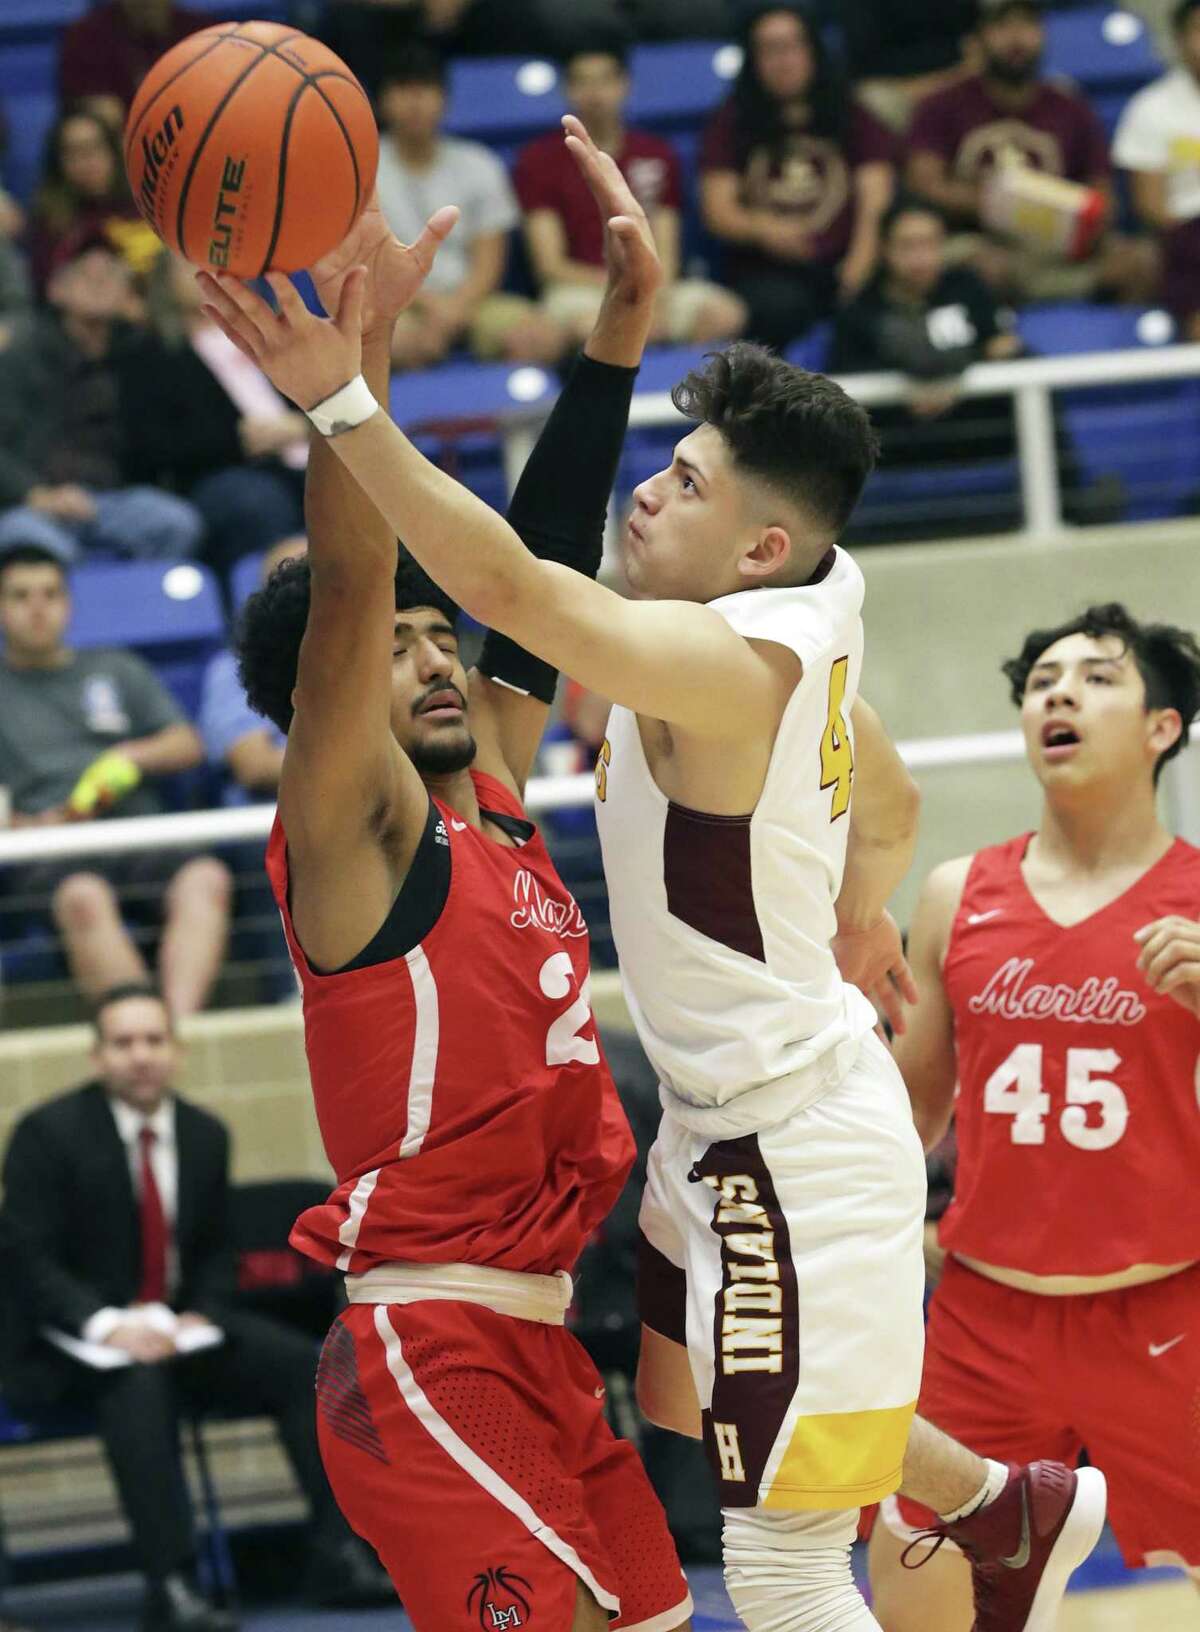 Indian guard Caleb Garcia stretches a shot at the hoop past Mathew Duron as Harlandale plays Laredo Martin in Class 5A third-round basketball playoffs at Northdise ISD Gym on February 27, 2018.